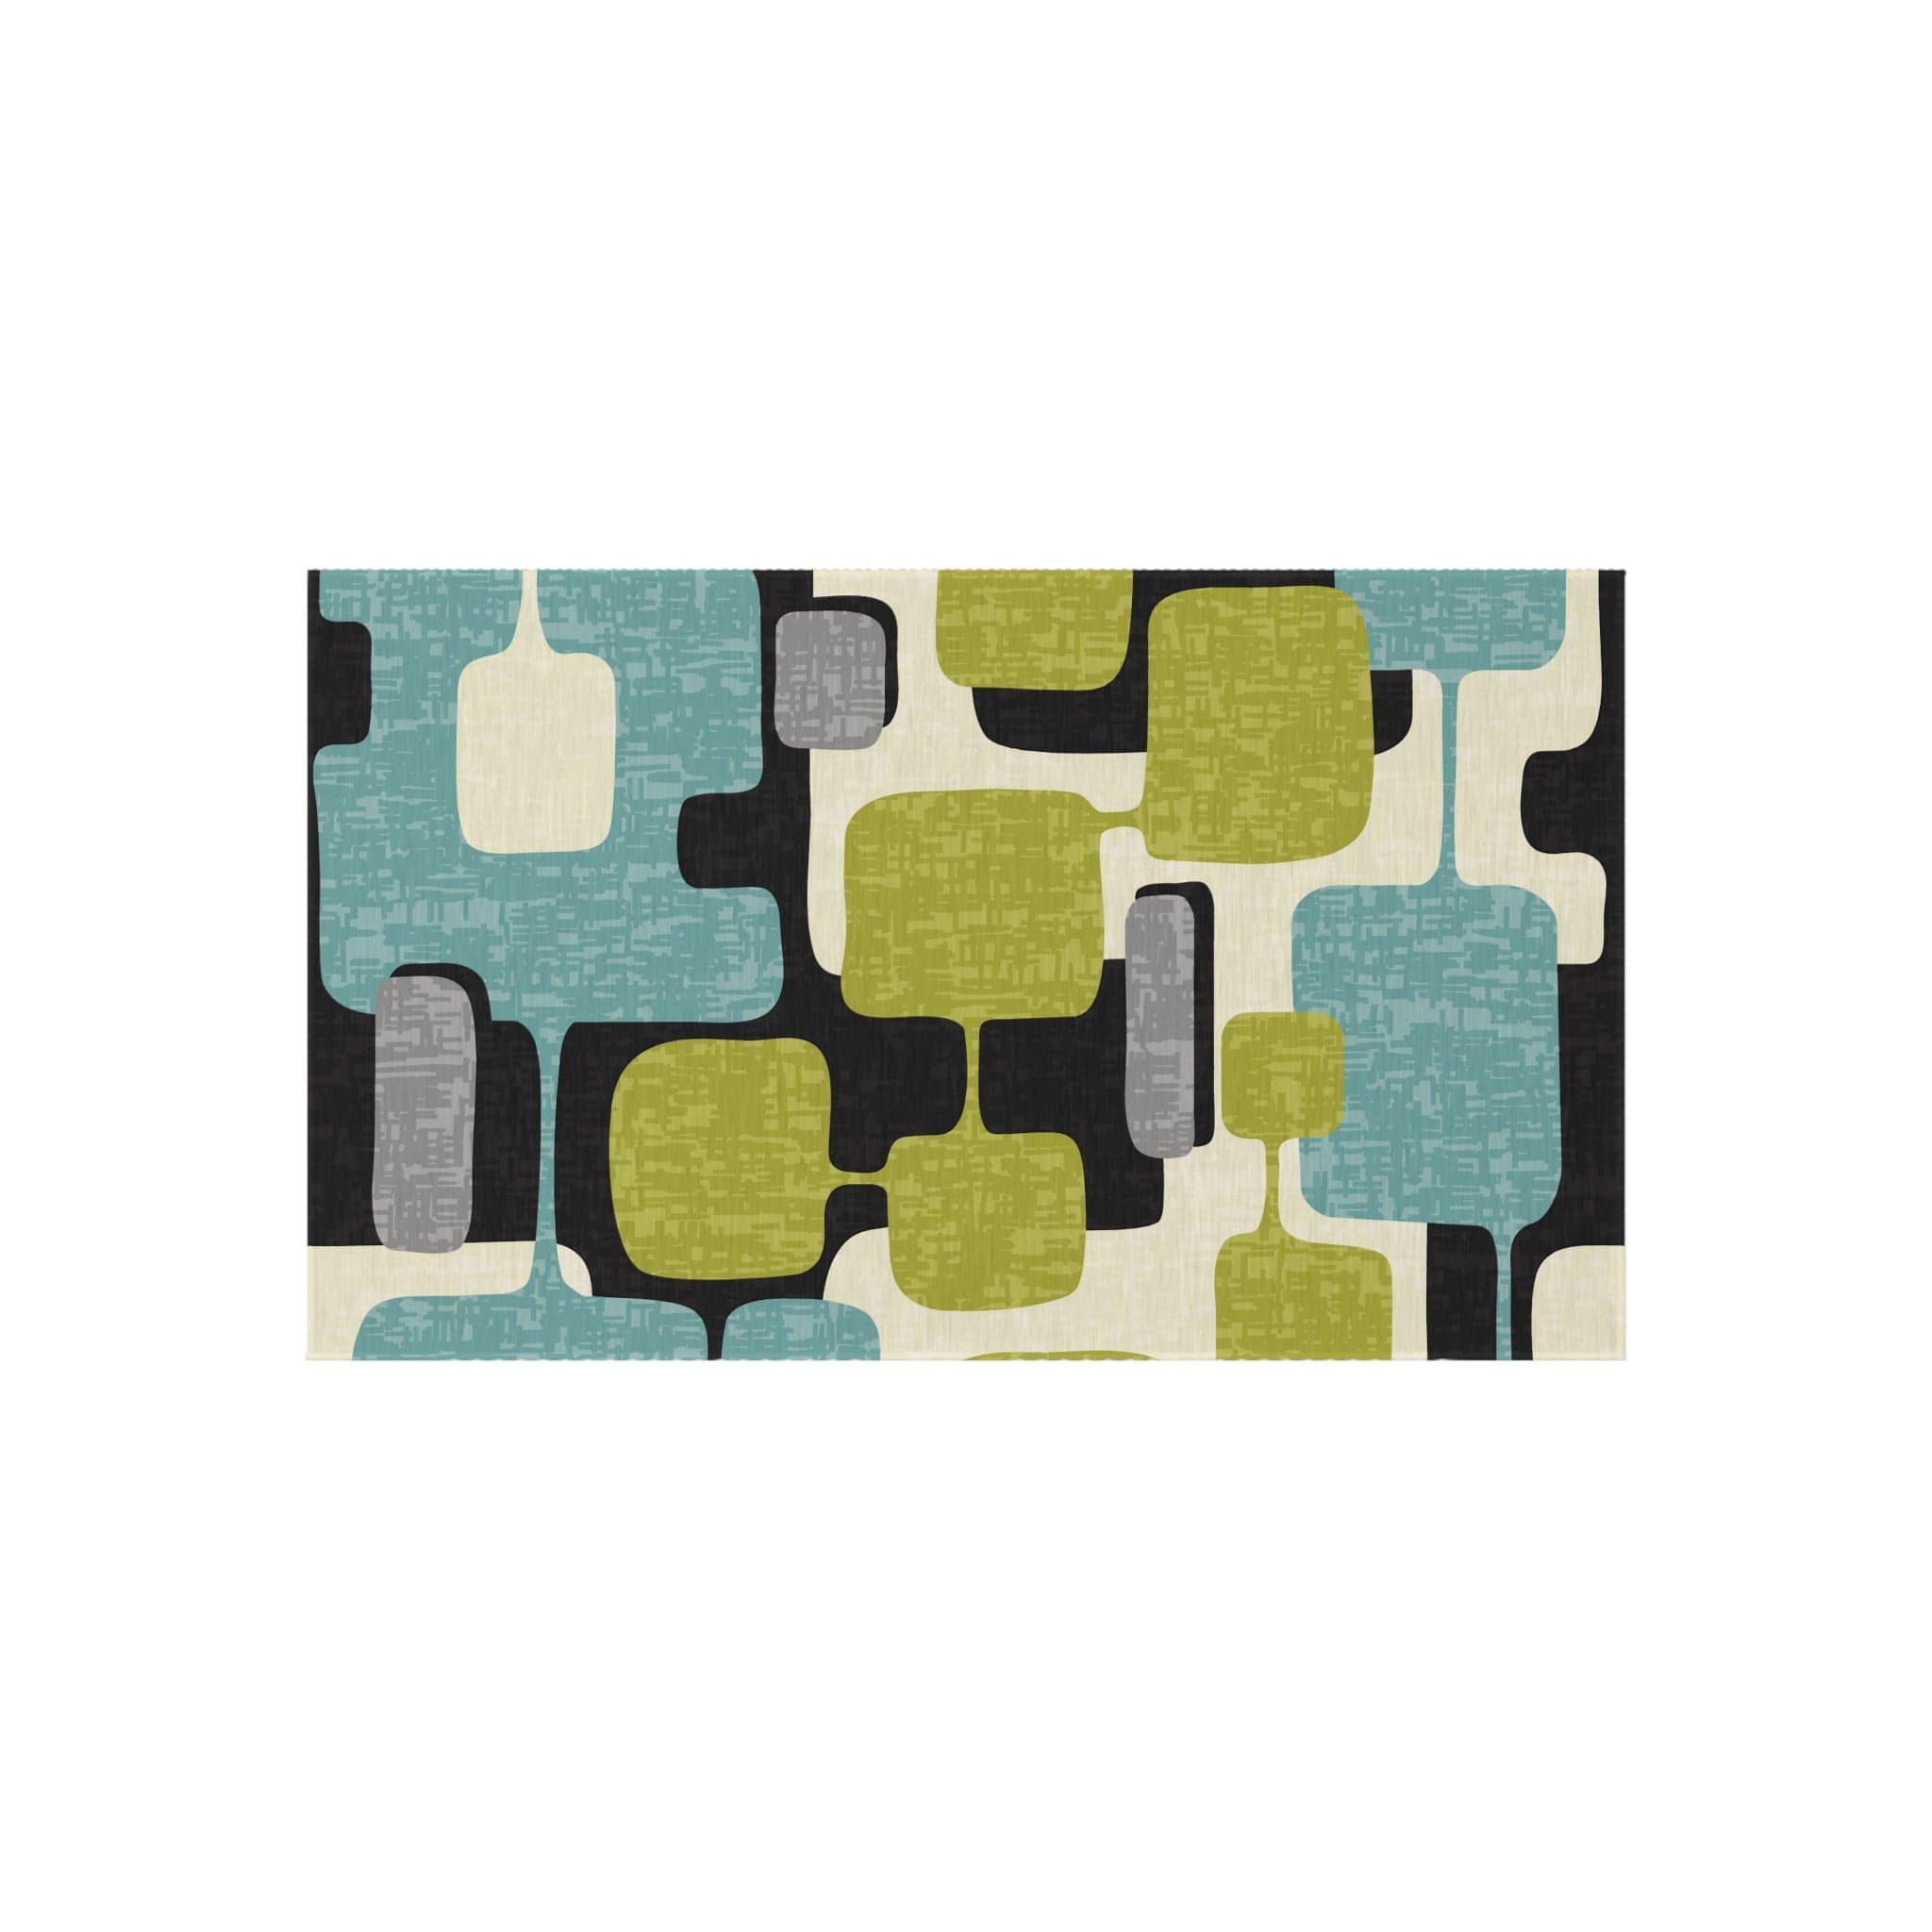 Kate McEnroe New York Retro Mid Century Modern Indoor - Outdoor Area Rug, MCM Teal, Lime Green, Gray, Cream Geometric Abstract Porch Patio Accent Rug Rugs